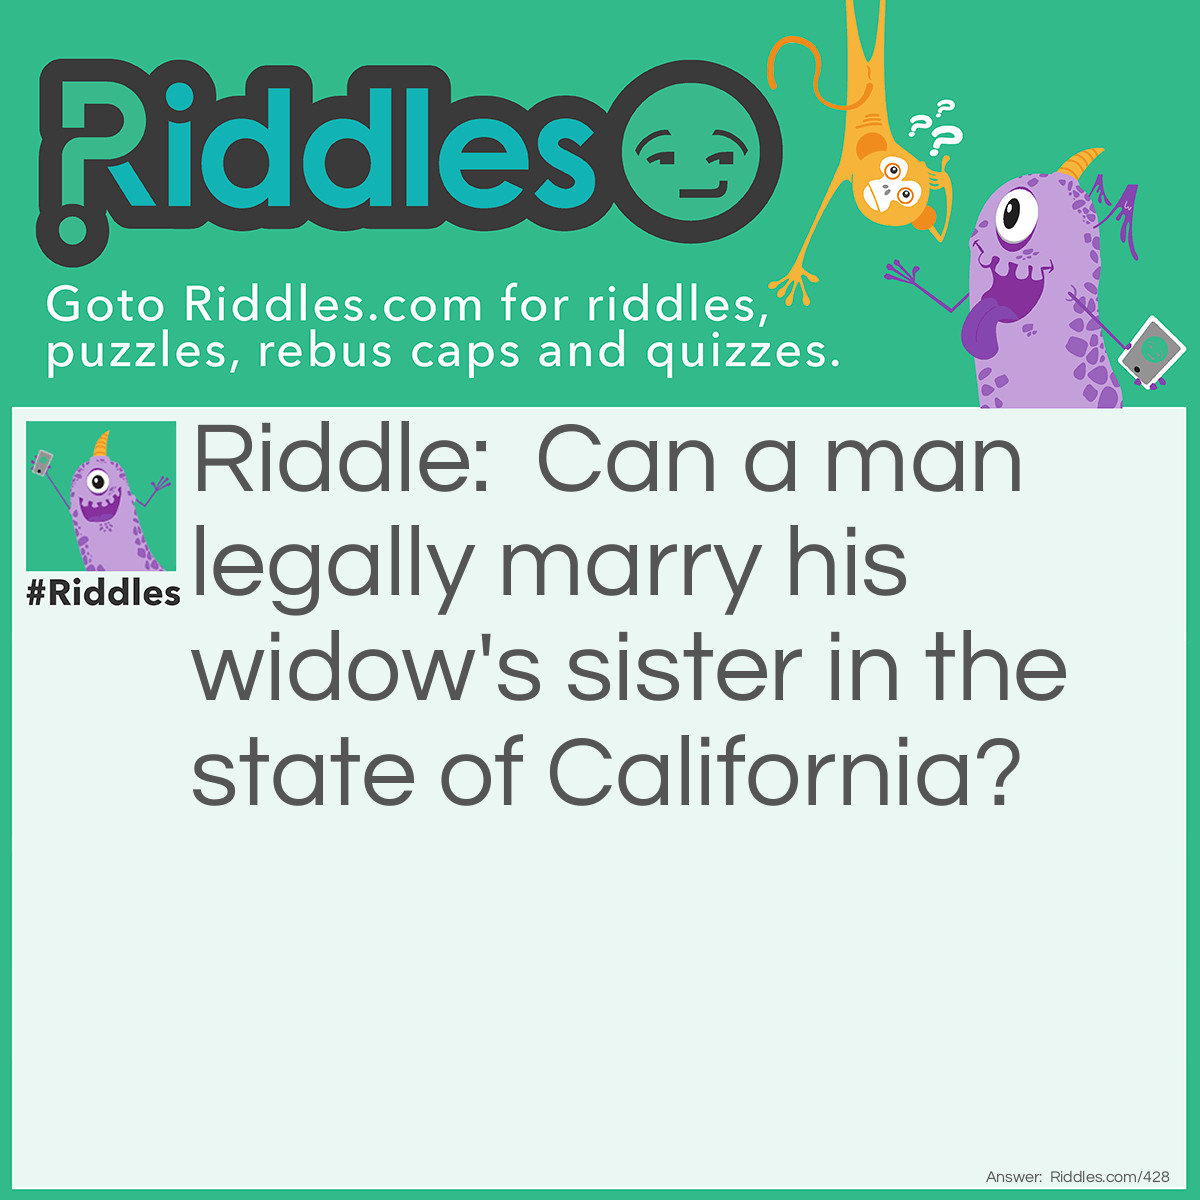 Riddle: Can a man legally marry his widow's sister in the state of California? Answer: NO since she is a 'widow', the guy's dead!